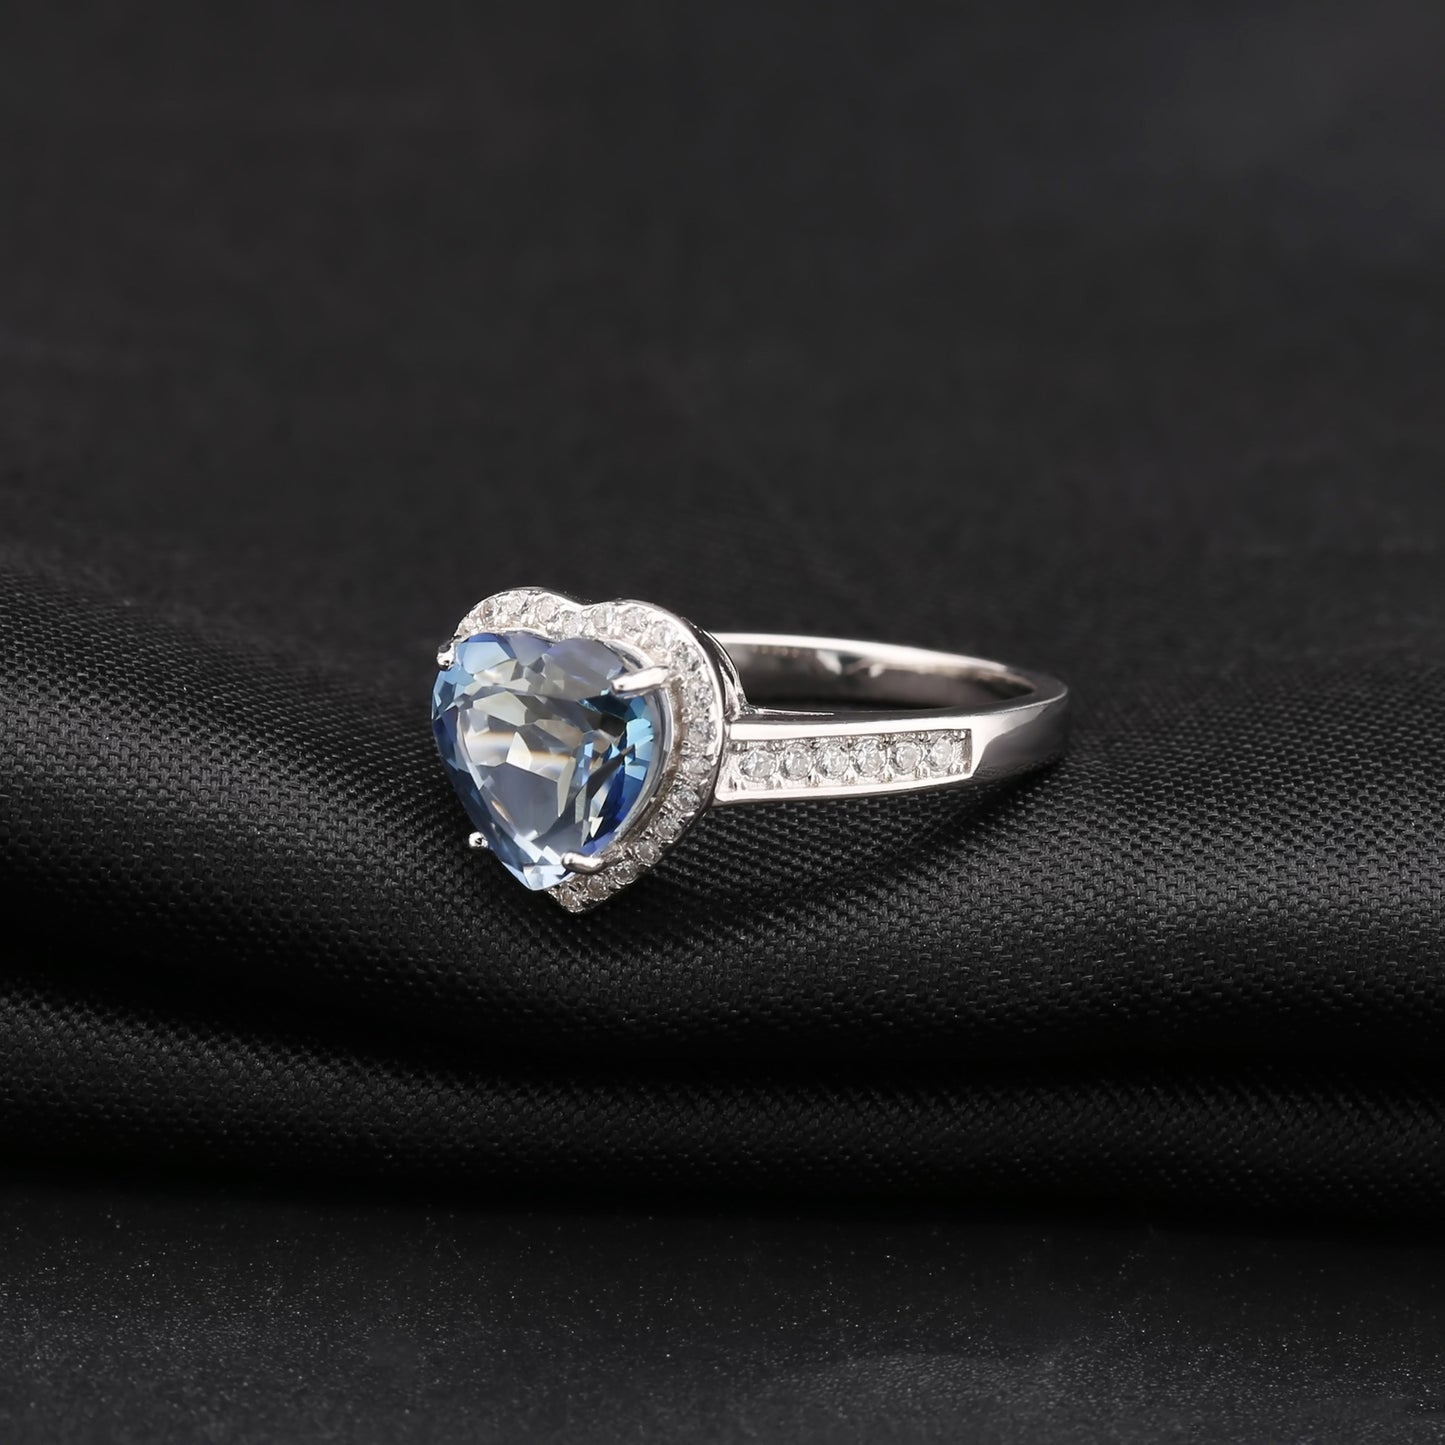 Luxury S925 Silver Natural Color Crystal Ring for Women